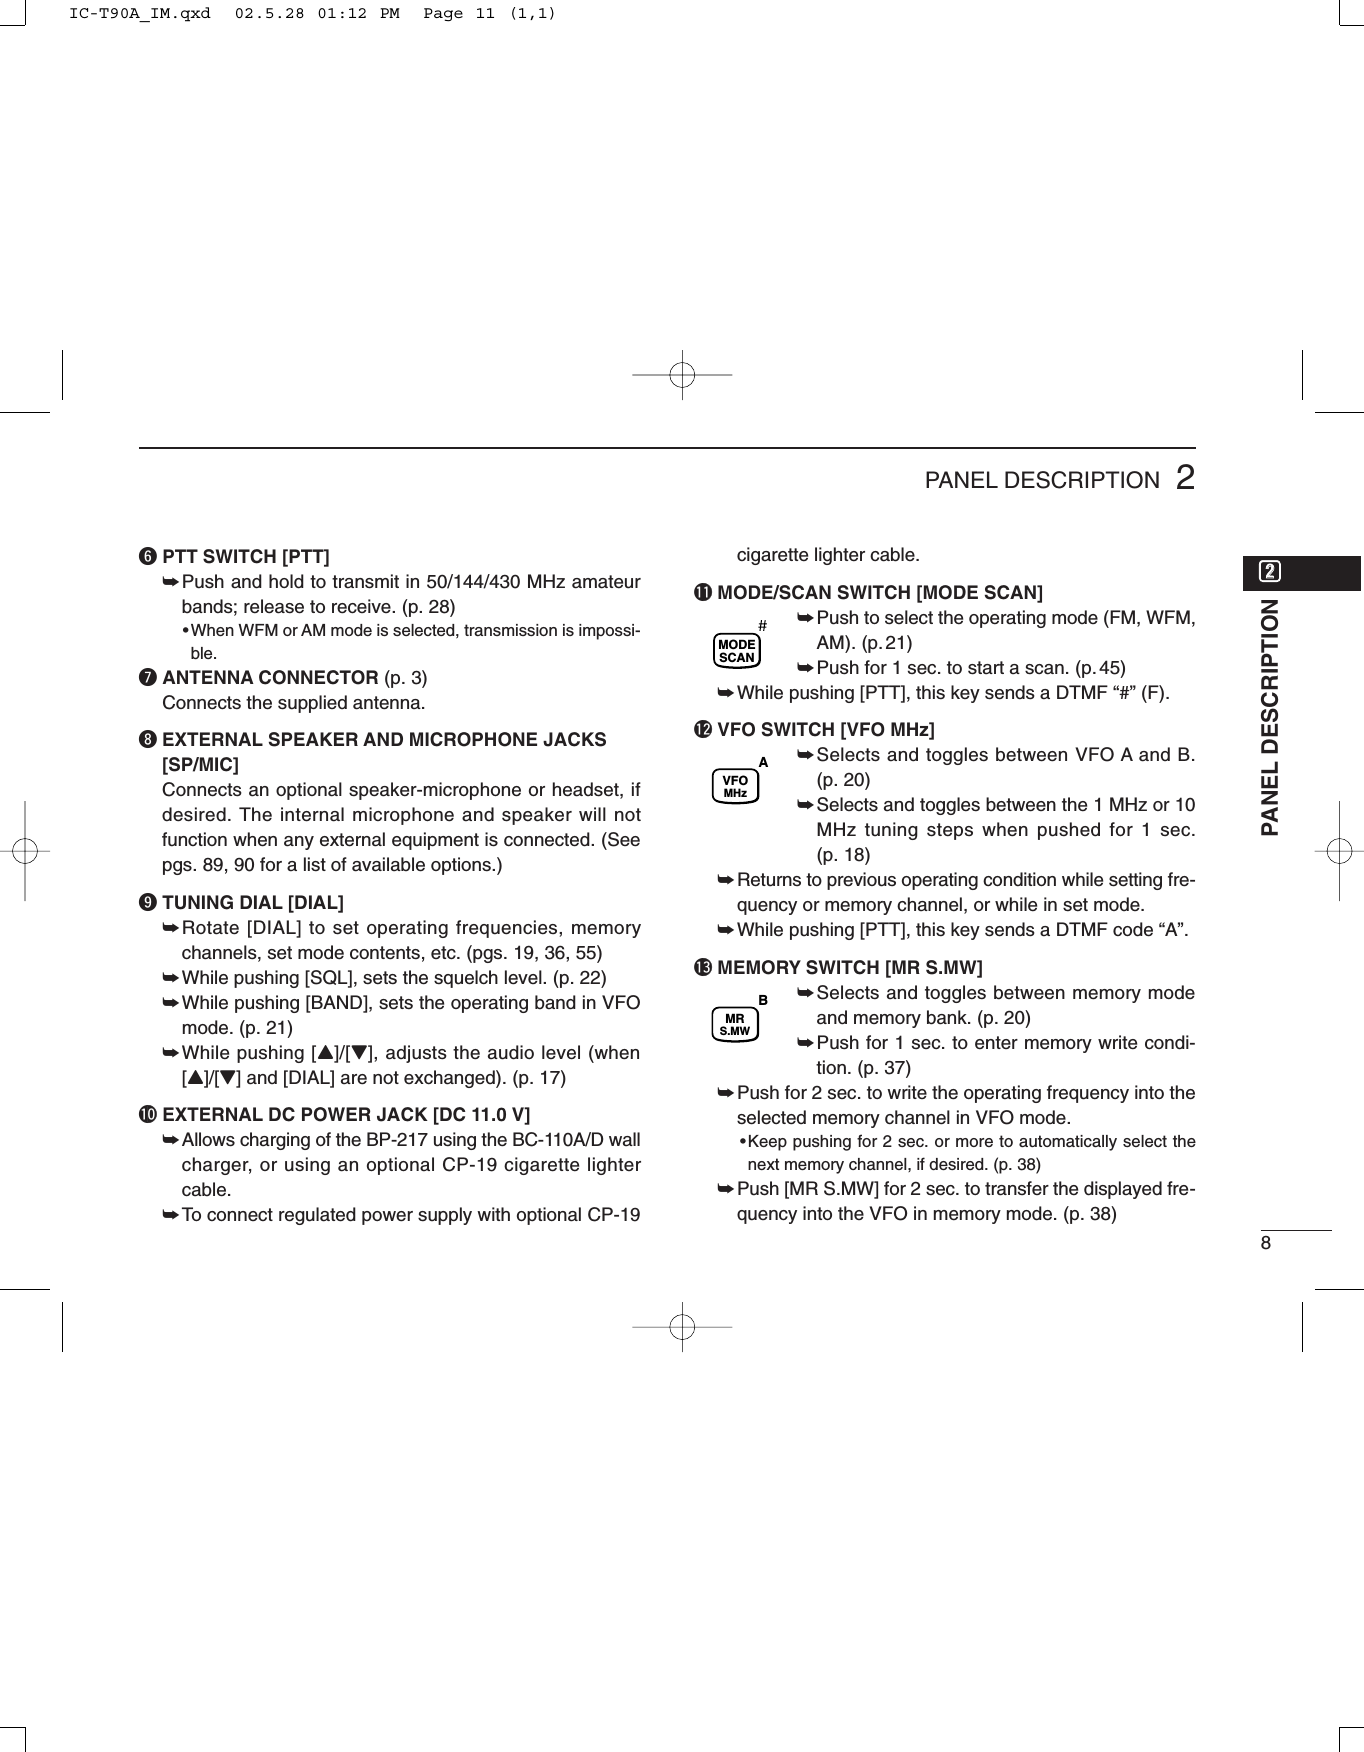 82PANEL DESCRIPTIONyPTT SWITCH [PTT]➥Push and hold to transmit in 50/144/430 MHz amateurbands; release to receive. (p. 28)•When WFM or AM mode is selected, transmission is impossi-ble.uANTENNA CONNECTOR (p. 3)Connects the supplied antenna.iEXTERNAL SPEAKER AND MICROPHONE JACKS[SP/MIC]Connects an optional speaker-microphone or headset, ifdesired. The internal microphone and speaker will notfunction when any external equipment is connected. (Seepgs. 89, 90 for a list of available options.)oTUNING DIAL [DIAL]➥Rotate [DIAL] to set operating frequencies, memorychannels, set mode contents, etc. (pgs. 19, 36, 55)➥While pushing [SQL], sets the squelch level. (p. 22)➥While pushing [BAND], sets the operating band in VFOmode. (p. 21)➥While pushing [Y]/[Z], adjusts the audio level (when[Y]/[Z] and [DIAL] are not exchanged). (p. 17)!0 EXTERNAL DC POWER JACK [DC 11.0 V]➥Allows charging of the BP-217 using the BC-110A/D wallcharger, or using an optional CP-19 cigarette lightercable.➥To connect regulated power supply with optional CP-19cigarette lighter cable.!1 MODE/SCAN SWITCH [MODE SCAN]➥Push to select the operating mode (FM, WFM,AM). (p. 21)➥Push for 1 sec. to start a scan. (p. 45)➥While pushing [PTT], this key sends a DTMF “#” (F).!2 VFO SWITCH [VFO MHz]➥Selects and toggles between VFO A and B. (p. 20)➥Selects and toggles between the 1 MHz or 10MHz tuning steps when pushed for 1 sec. (p. 18)➥Returns to previous operating condition while setting fre-quency or memory channel, or while in set mode.➥While pushing [PTT], this key sends a DTMF code “A”.!3 MEMORY SWITCH [MR S.MW] ➥Selects and toggles between memory modeand memory bank. (p. 20)➥Push for 1 sec. to enter memory write condi-tion. (p. 37)➥Push for 2 sec. to write the operating frequency into theselected memory channel in VFO mode.•Keep pushing for 2 sec. or more to automatically select thenext memory channel, if desired. (p. 38)➥Push [MR S.MW] for 2 sec. to transfer the displayed fre-quency into the VFO in memory mode. (p. 38)MRS.MWBVFOMHzAMODESCANwwPANEL DESCRIPTIONIC-T90A_IM.qxd  02.5.28 01:12 PM  Page 11 (1,1)